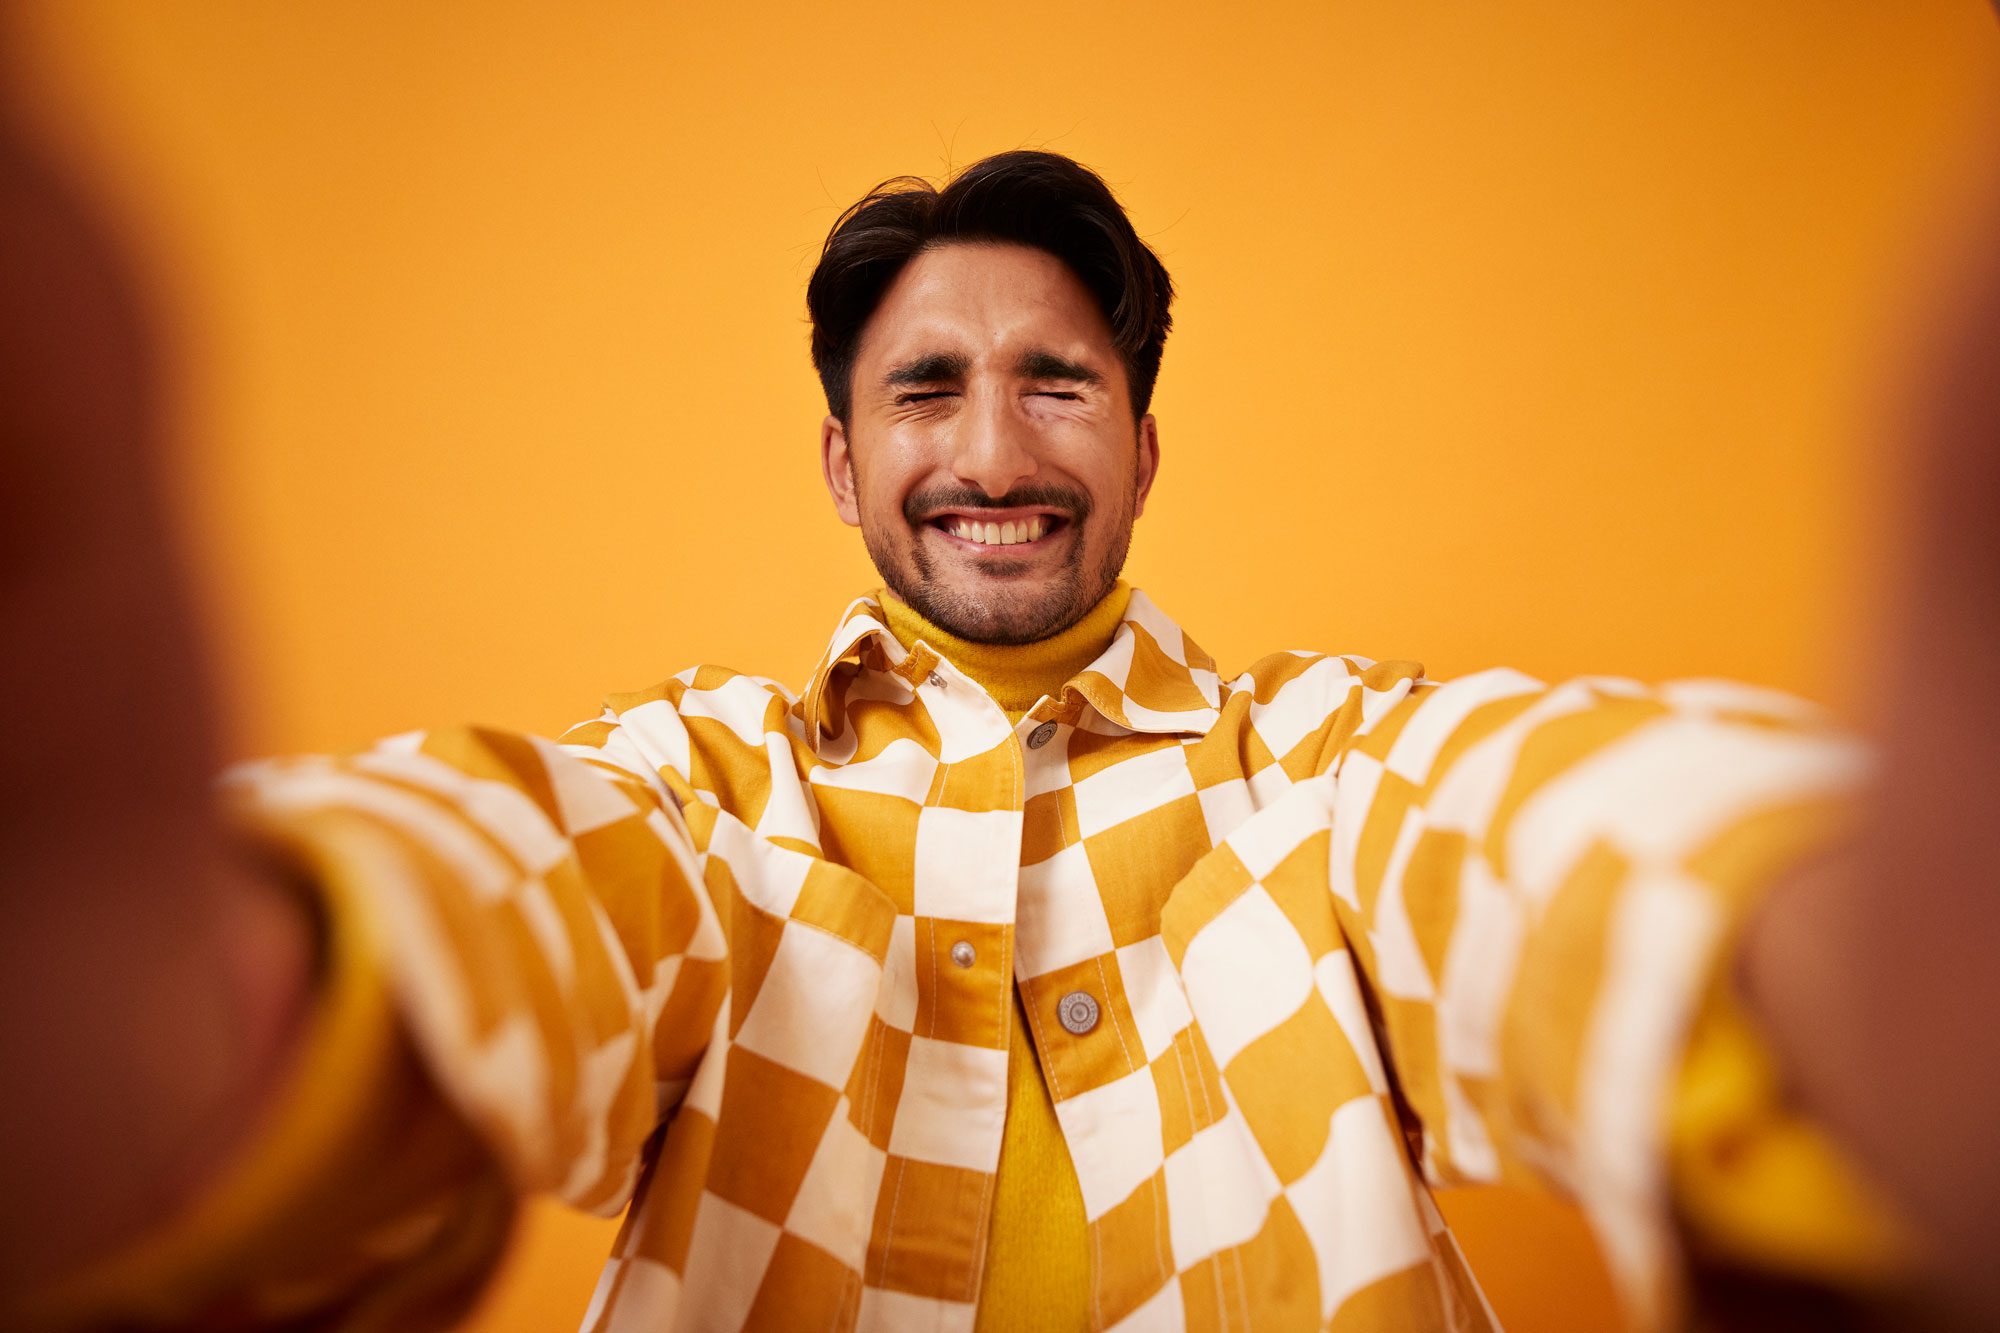 man in a checkered shirt taking a selfie while laughing with eyes closed against dark yellow background